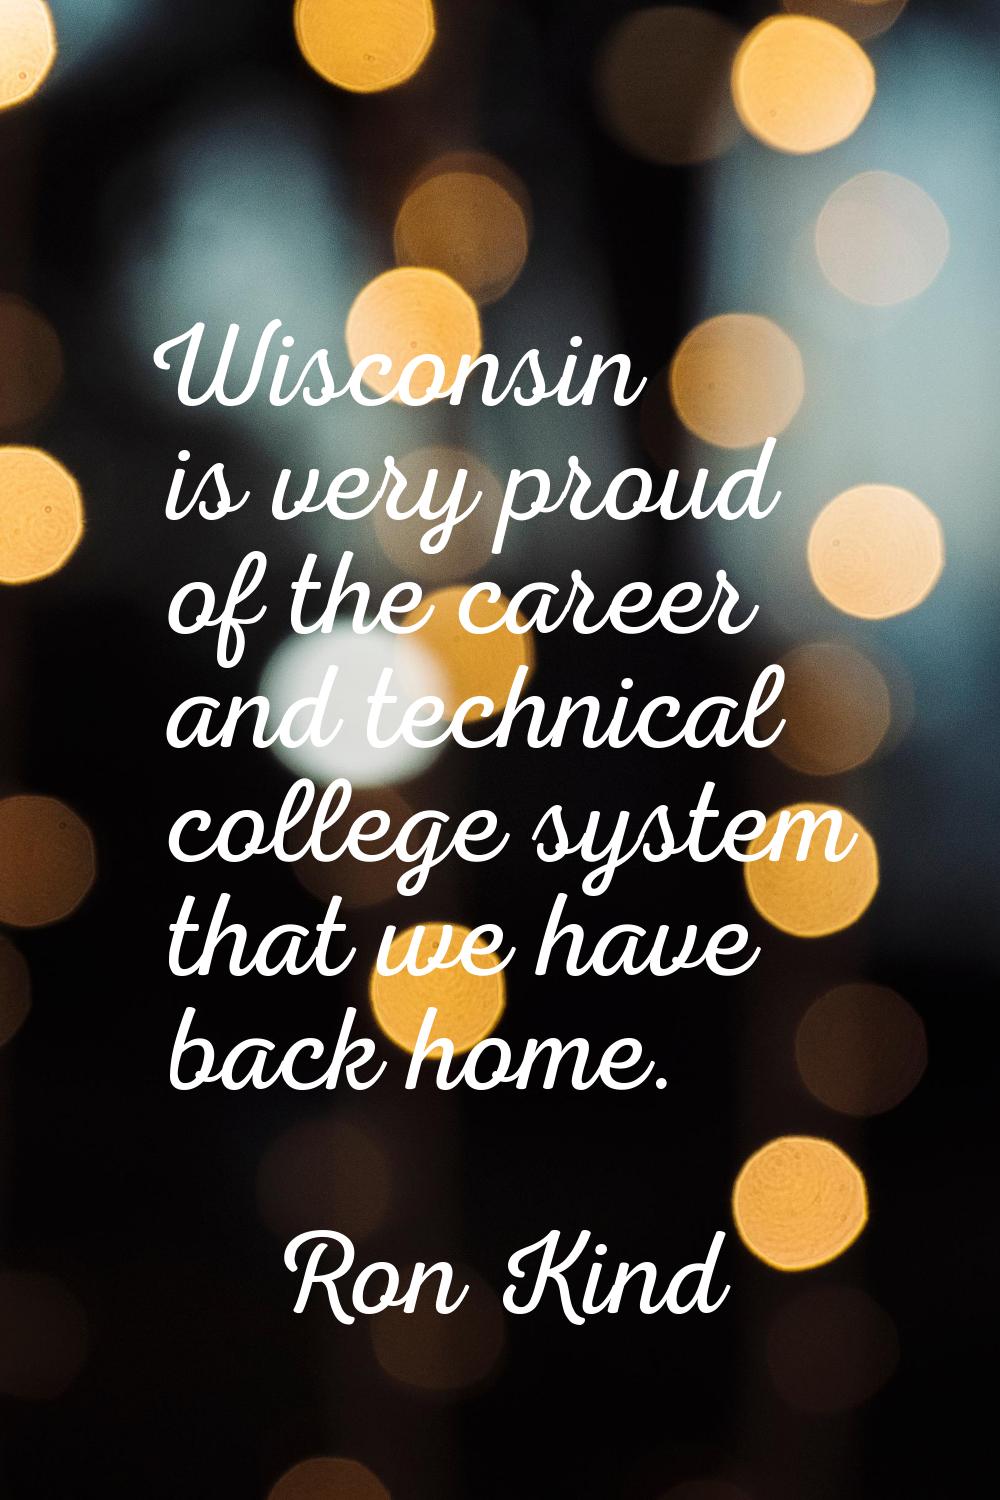 Wisconsin is very proud of the career and technical college system that we have back home.